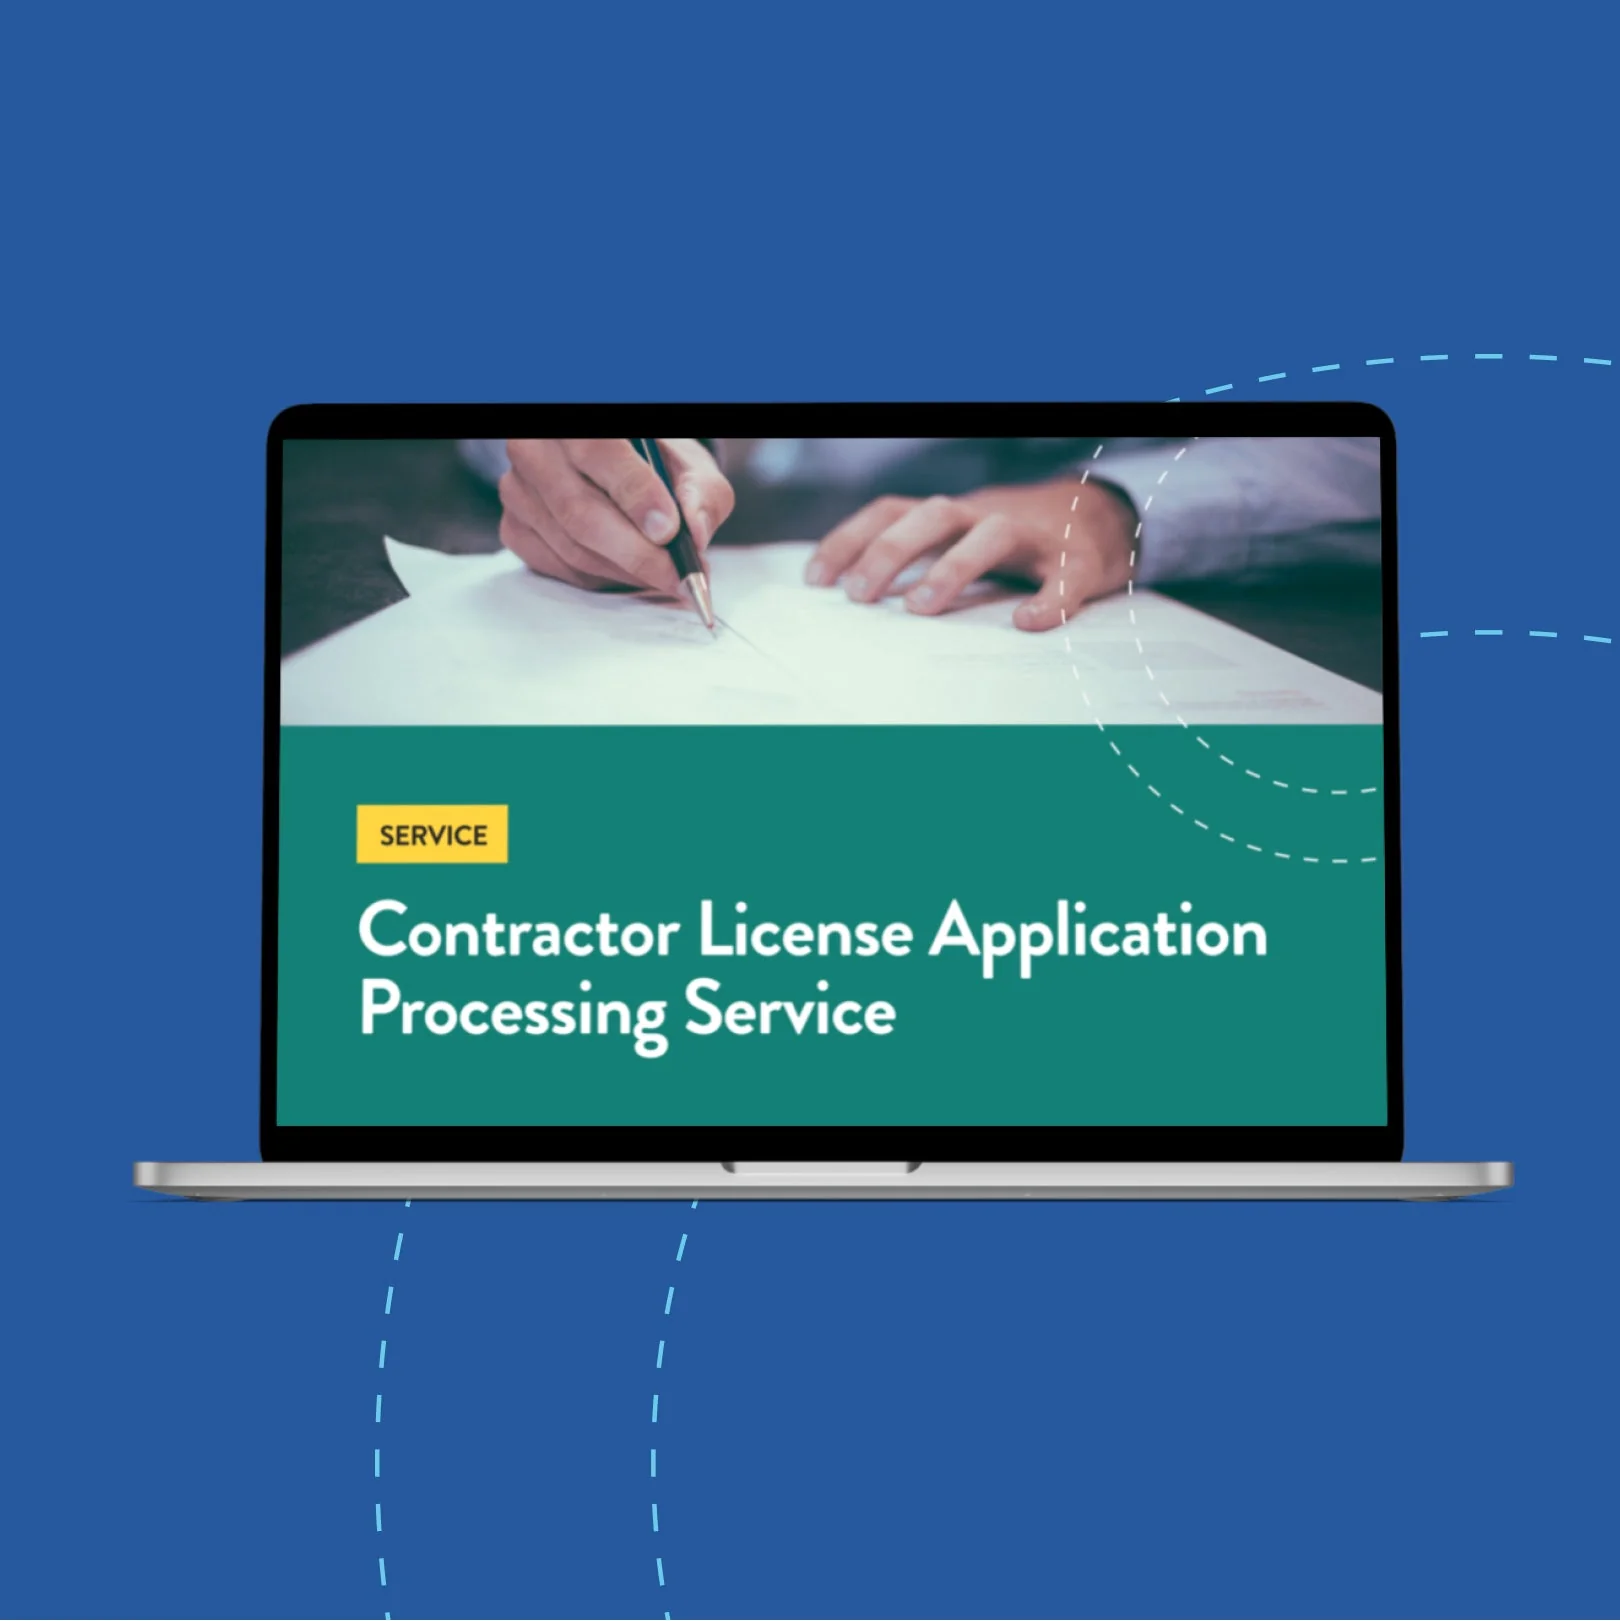 What does your Contractor License Application Processing Service include?